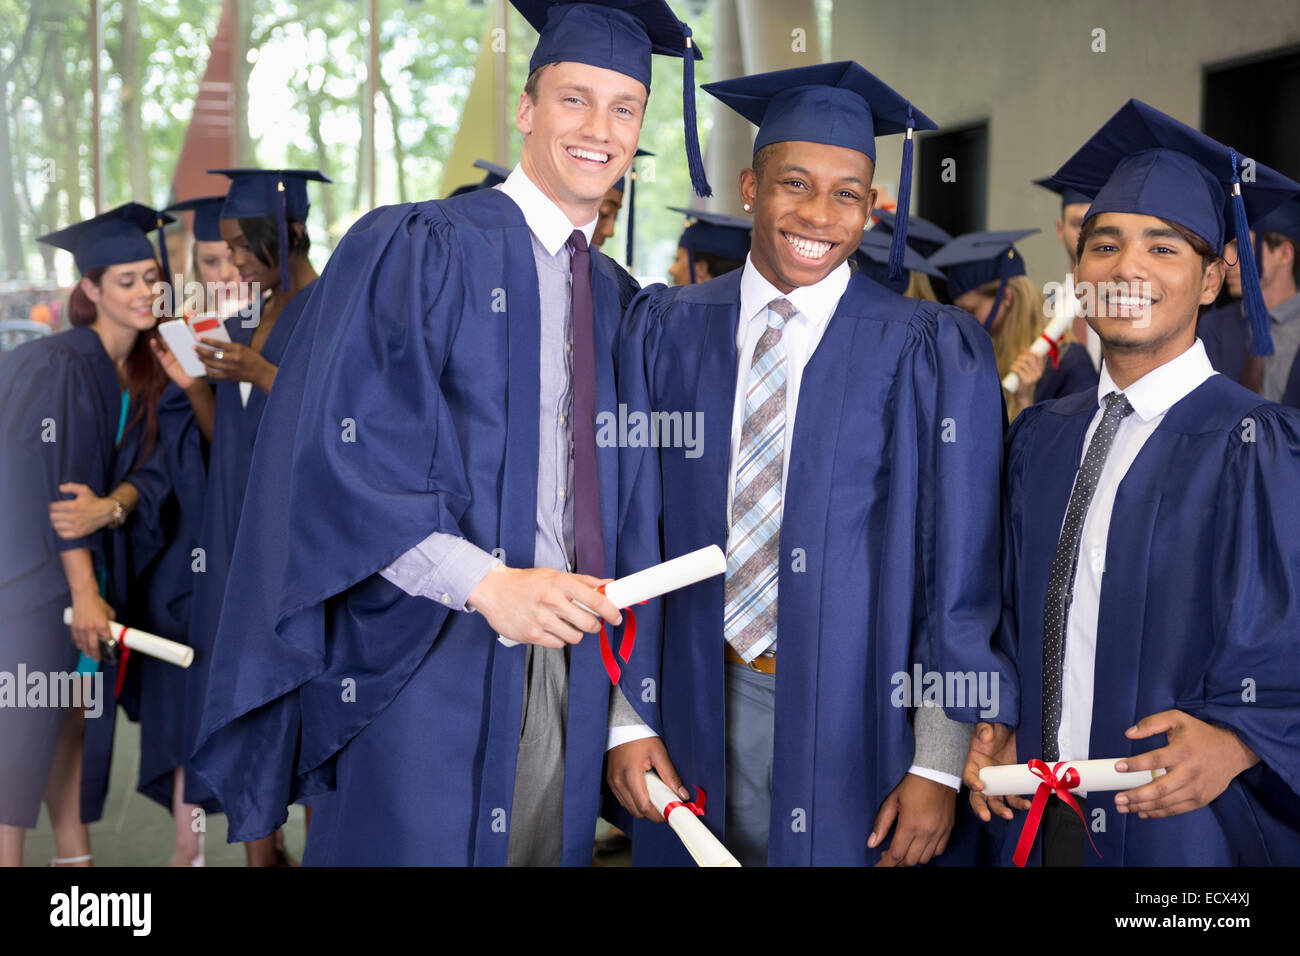 Portrait of three smiling male students in graduation gowns holding diplomas Stock Photo